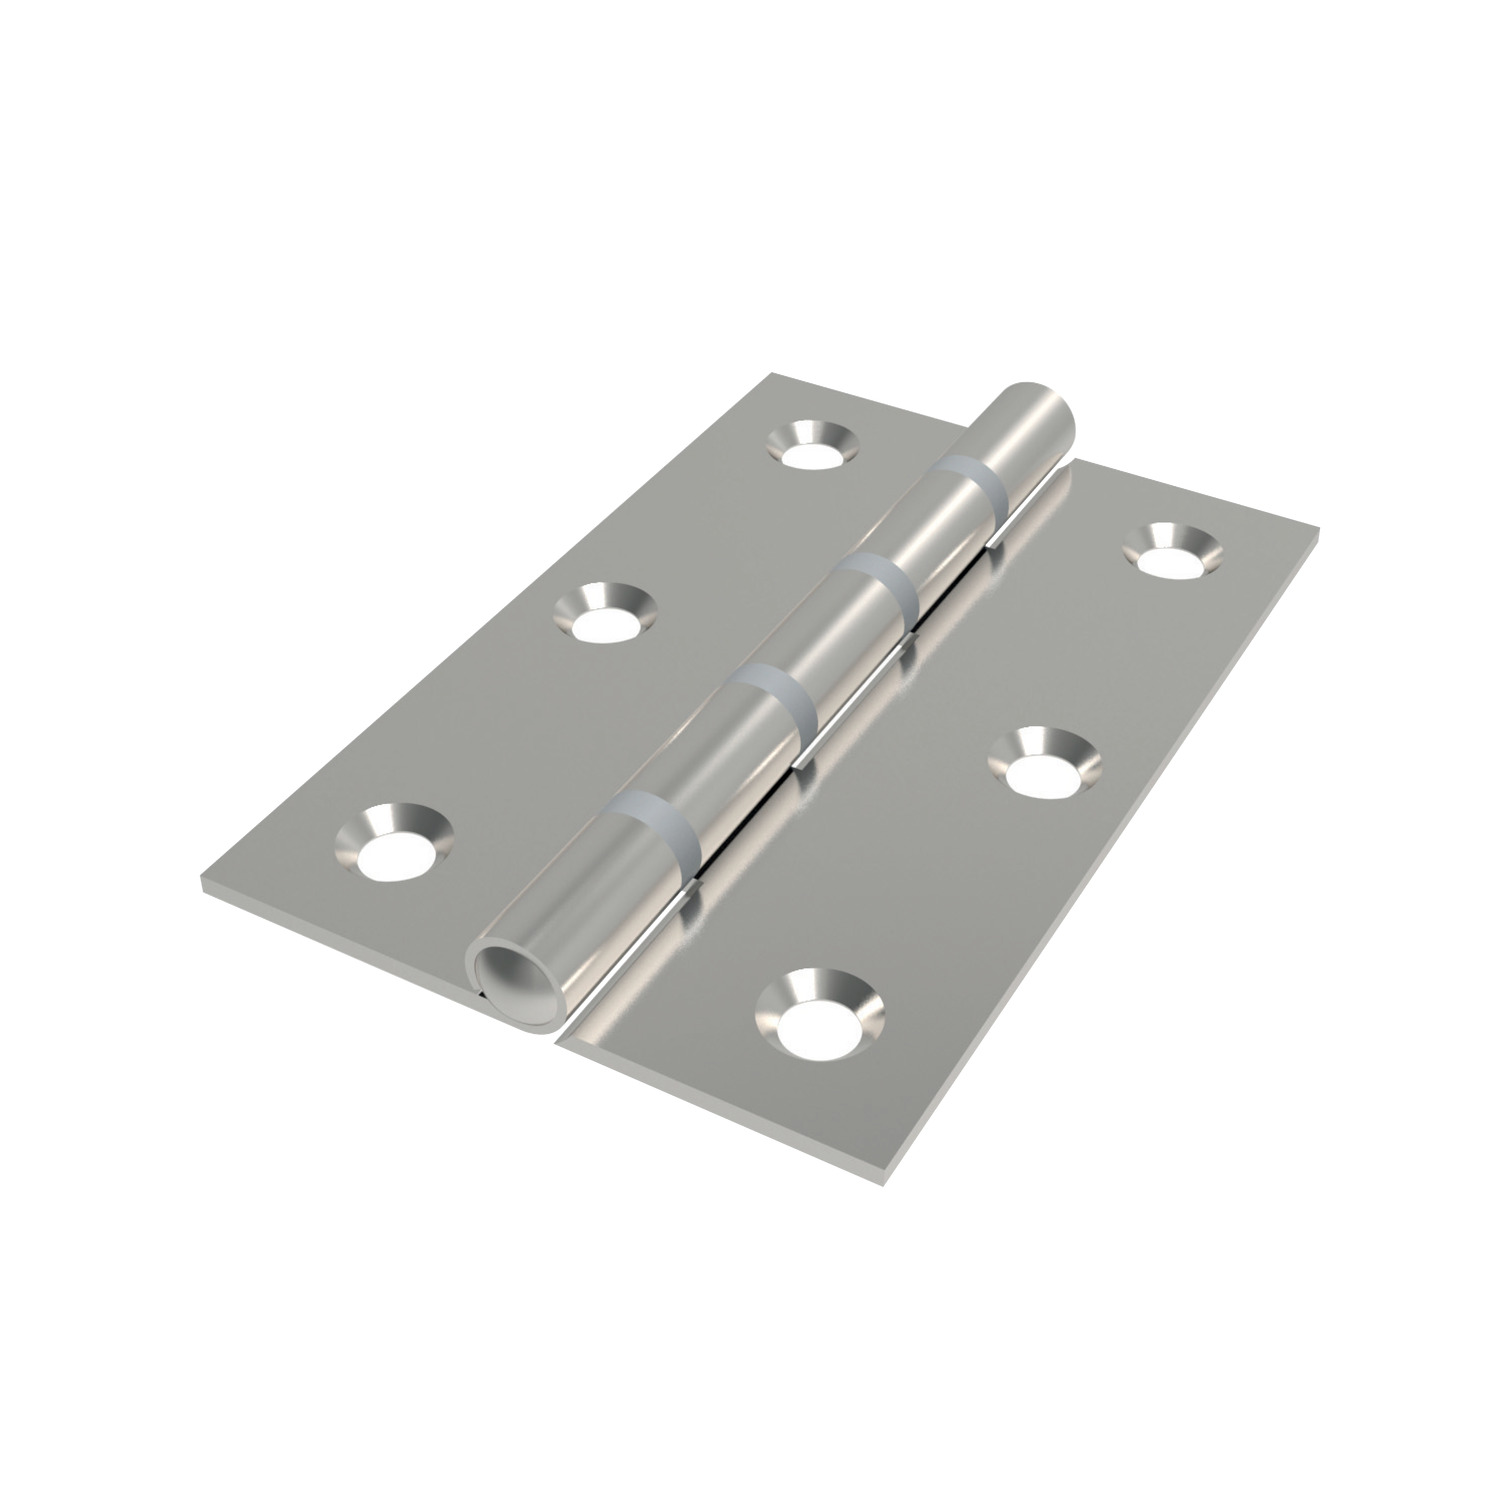 Surface Mount - Leaf hinges Made from stainless steel, AISI 304, with a polished finish